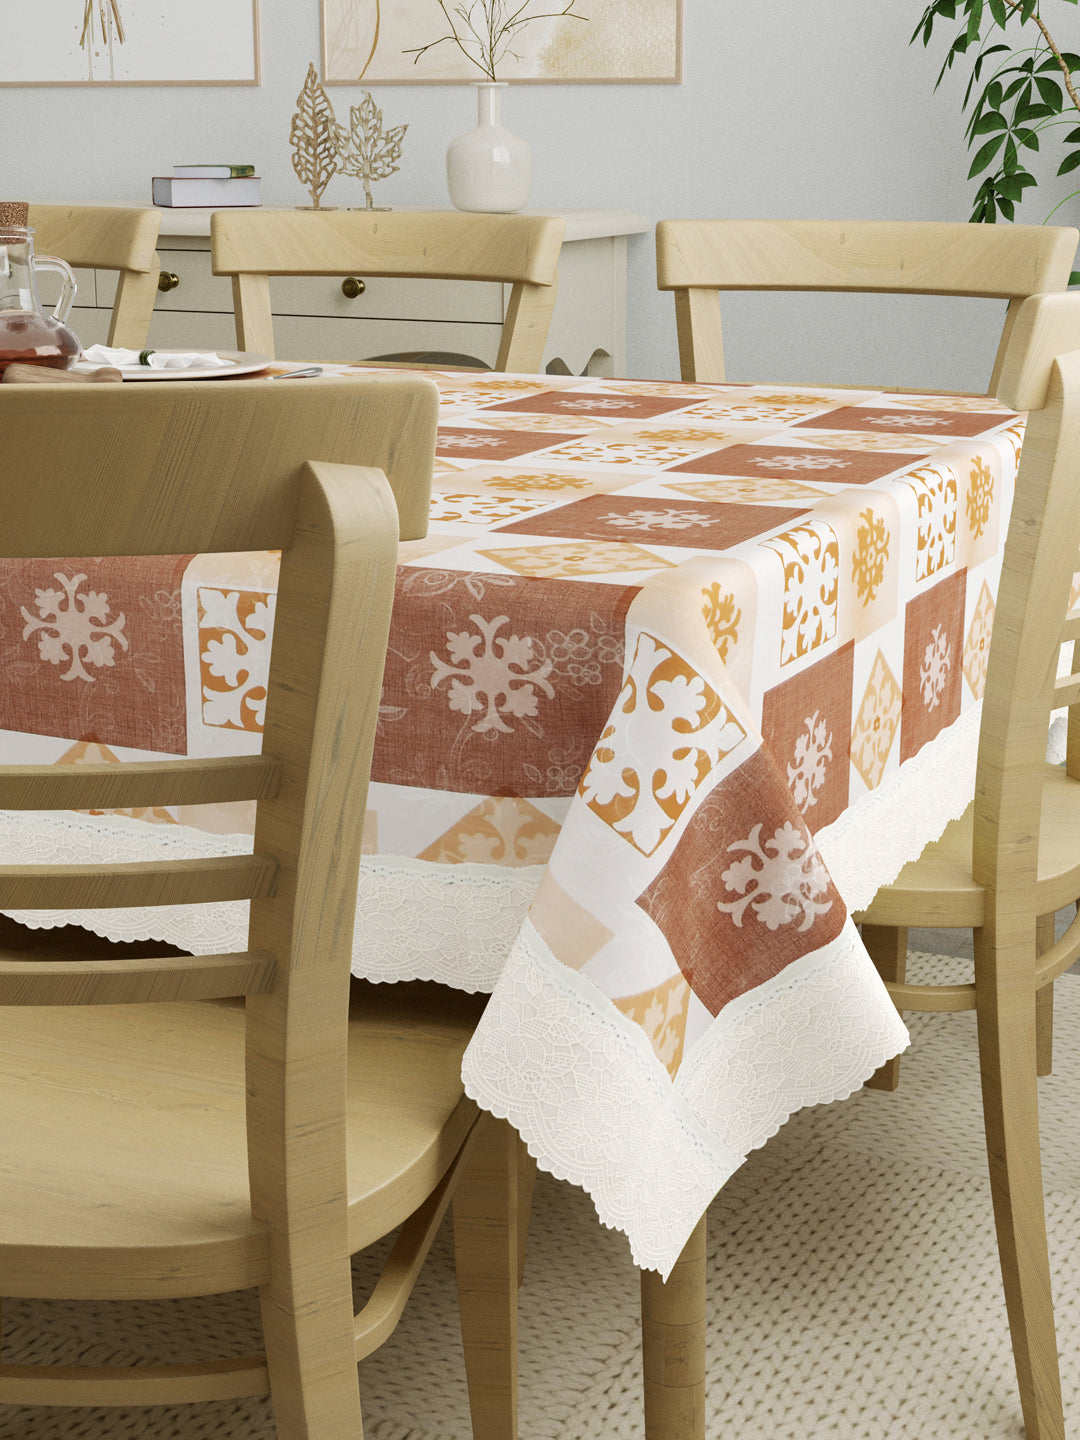 8 Seater Dining Table Cover; Material - PVC; Anti Slip; Brown & Yellow Checks